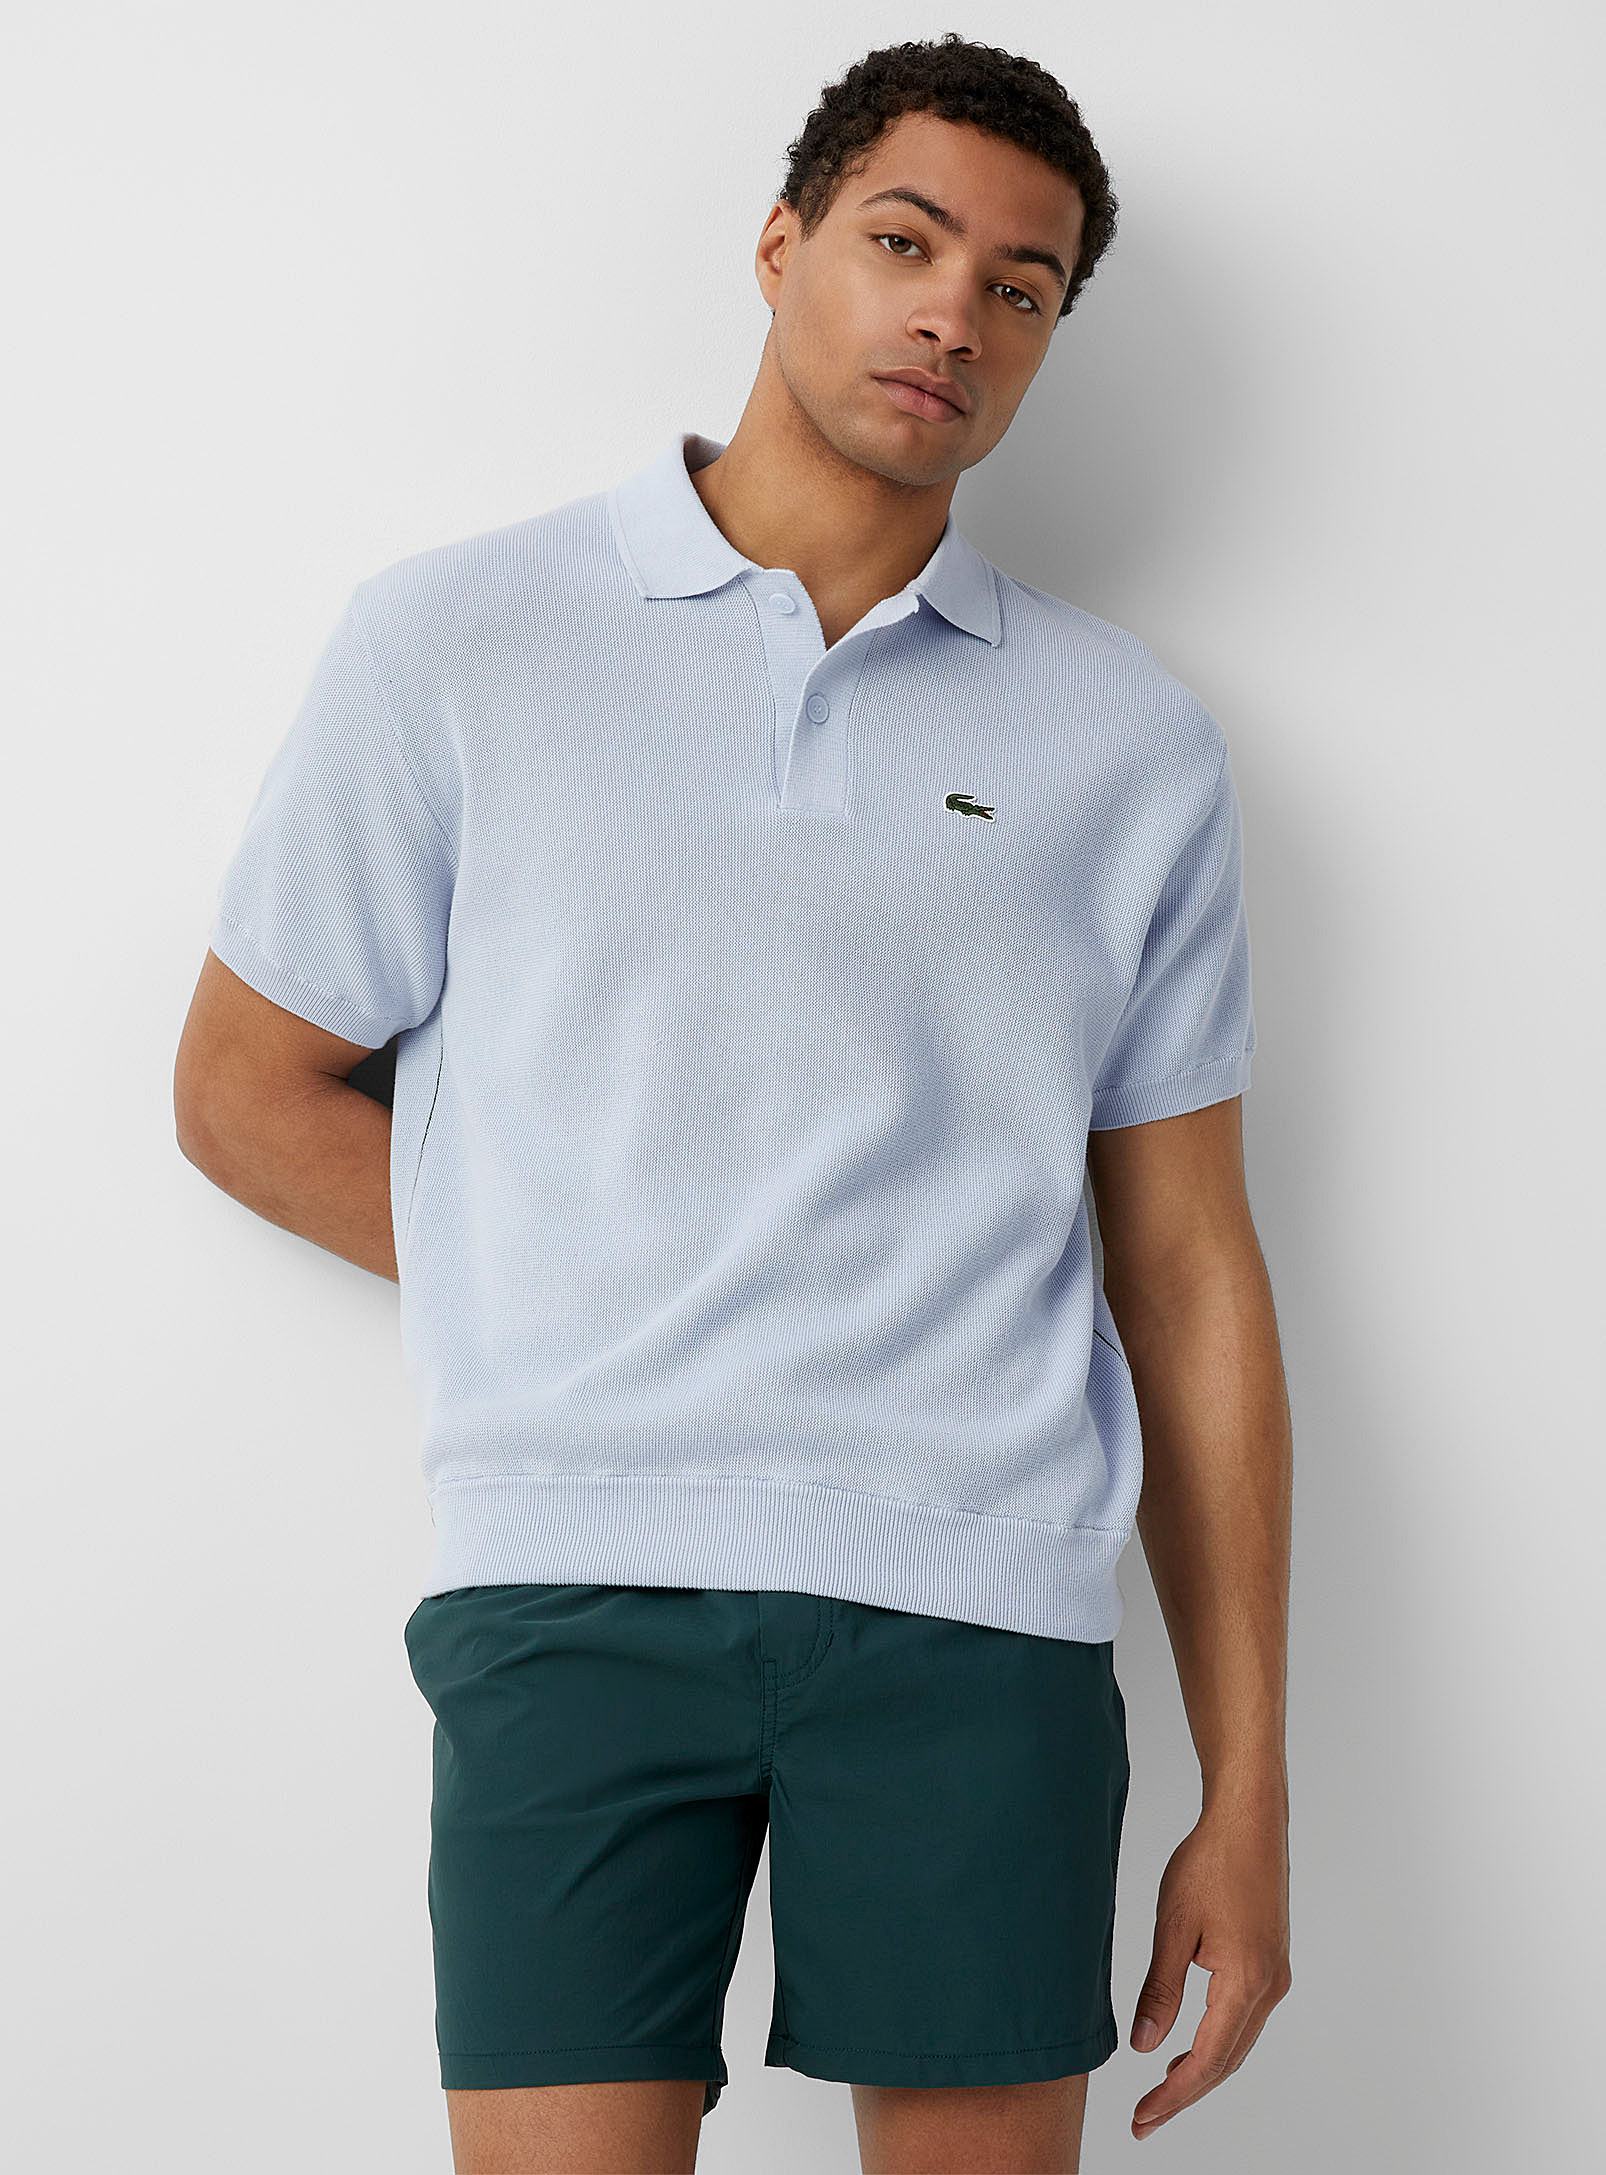 Lacoste - Men's Textured knit Polo Shirt